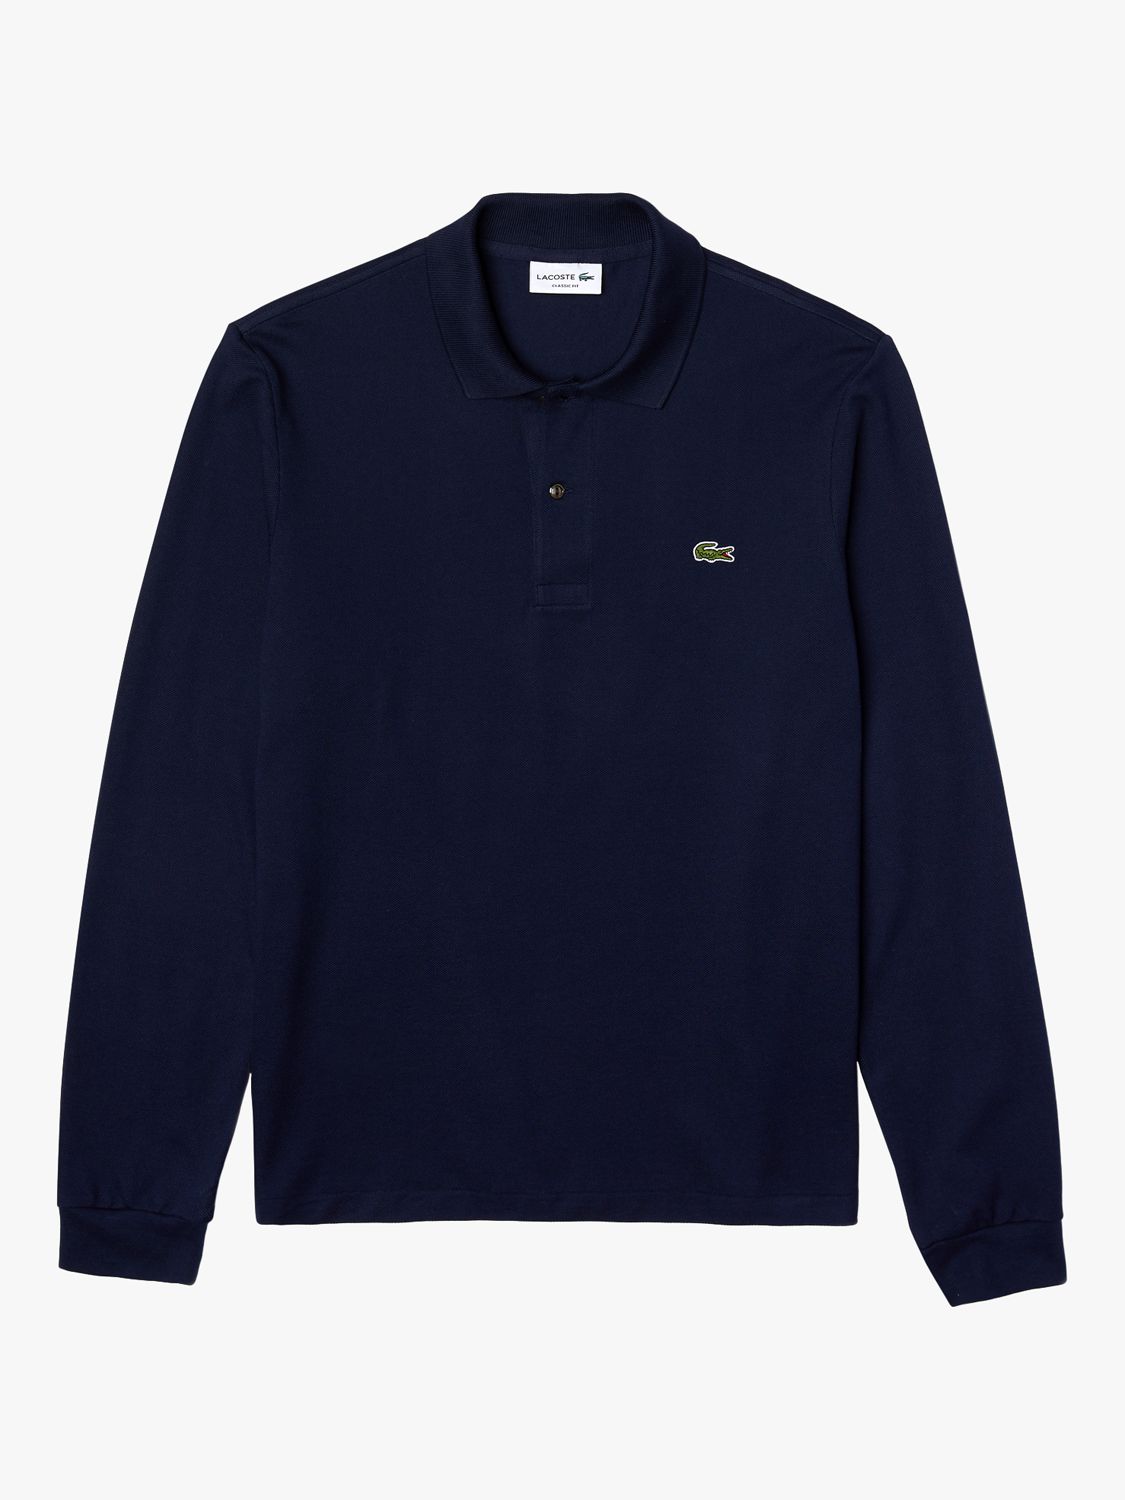 Lacoste L.13.12 Classic Regular Fit Long Sleeve Polo Shirt, 166 Navy Blue at John &